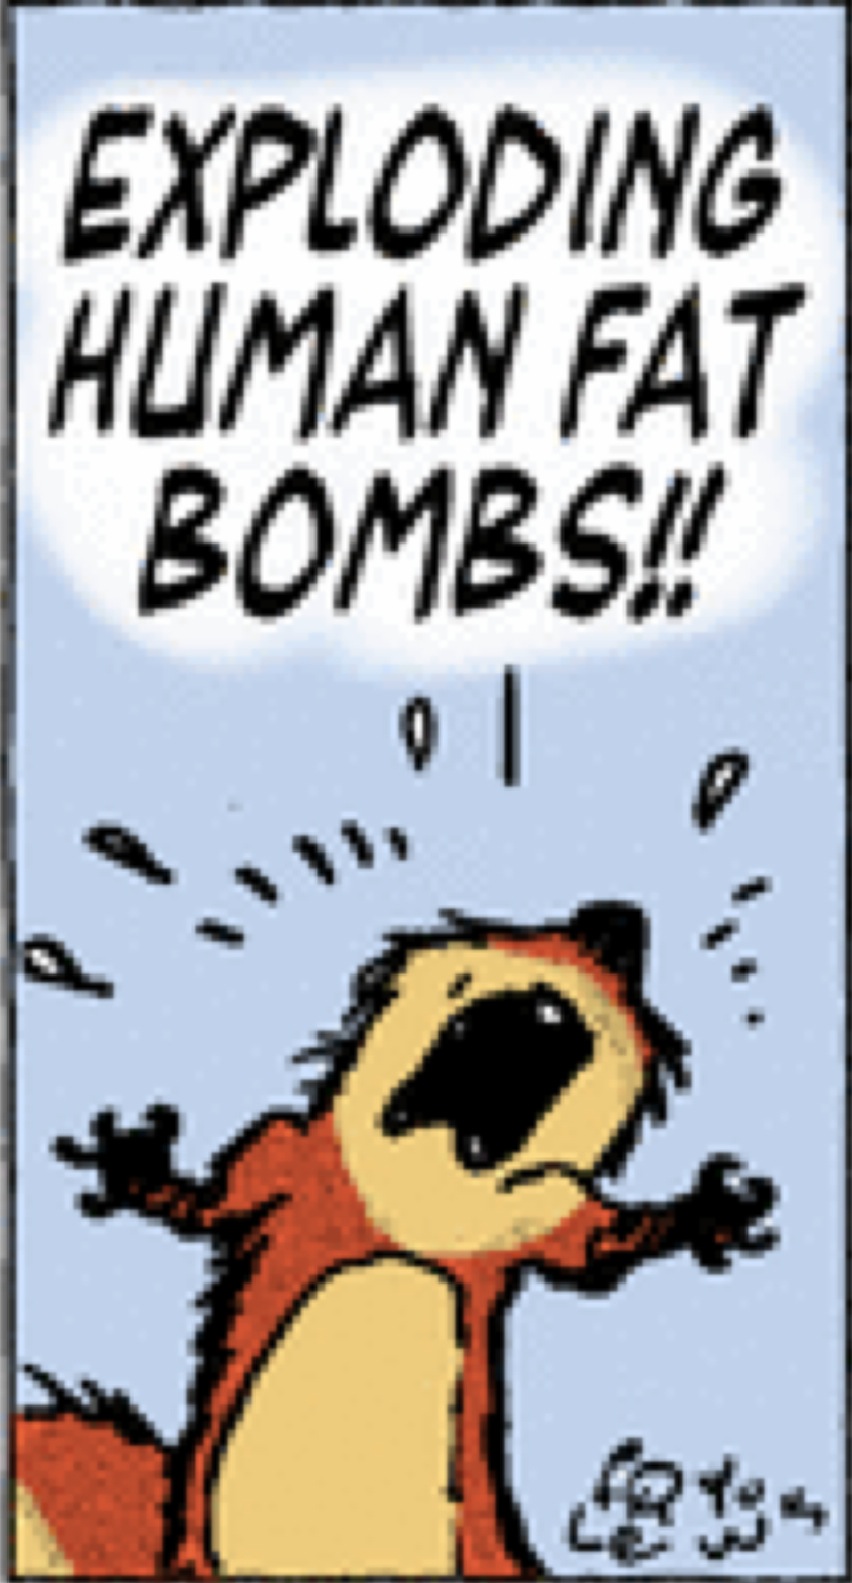 Exploding human fat bombs hedge 060110